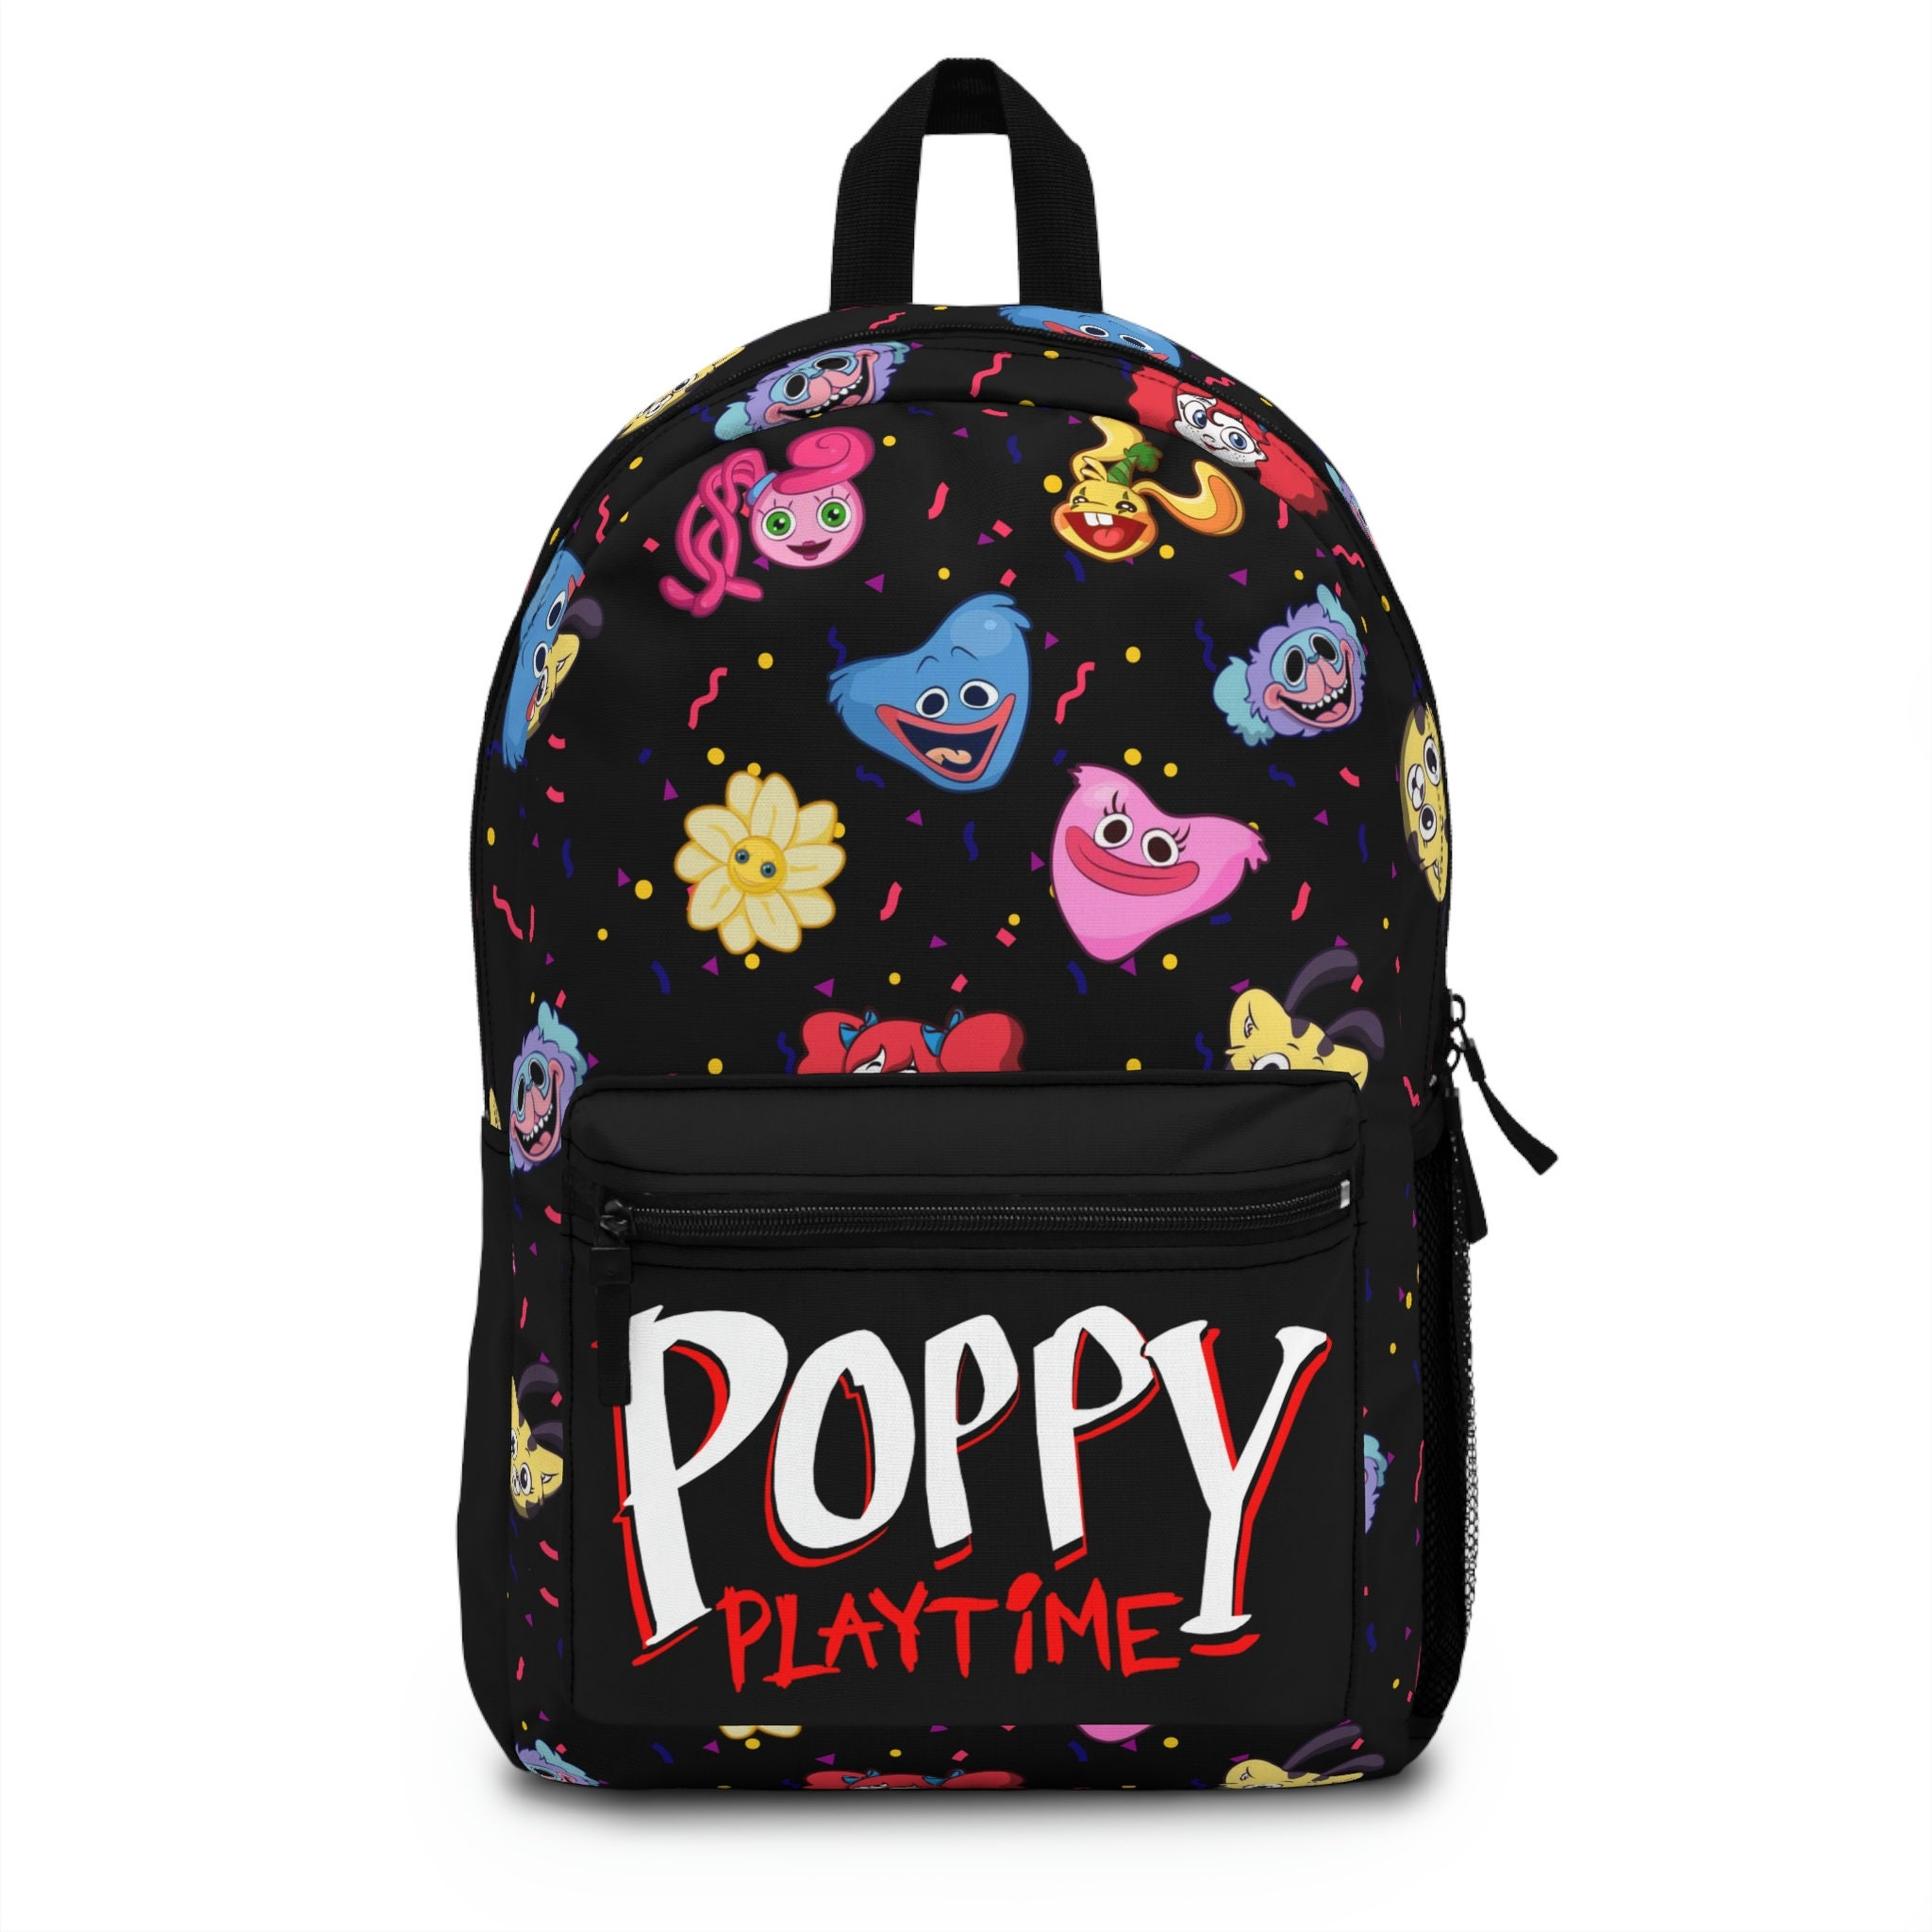 Mommy long legs Spider/Poppy Playtime - Backpack sold by Dusting